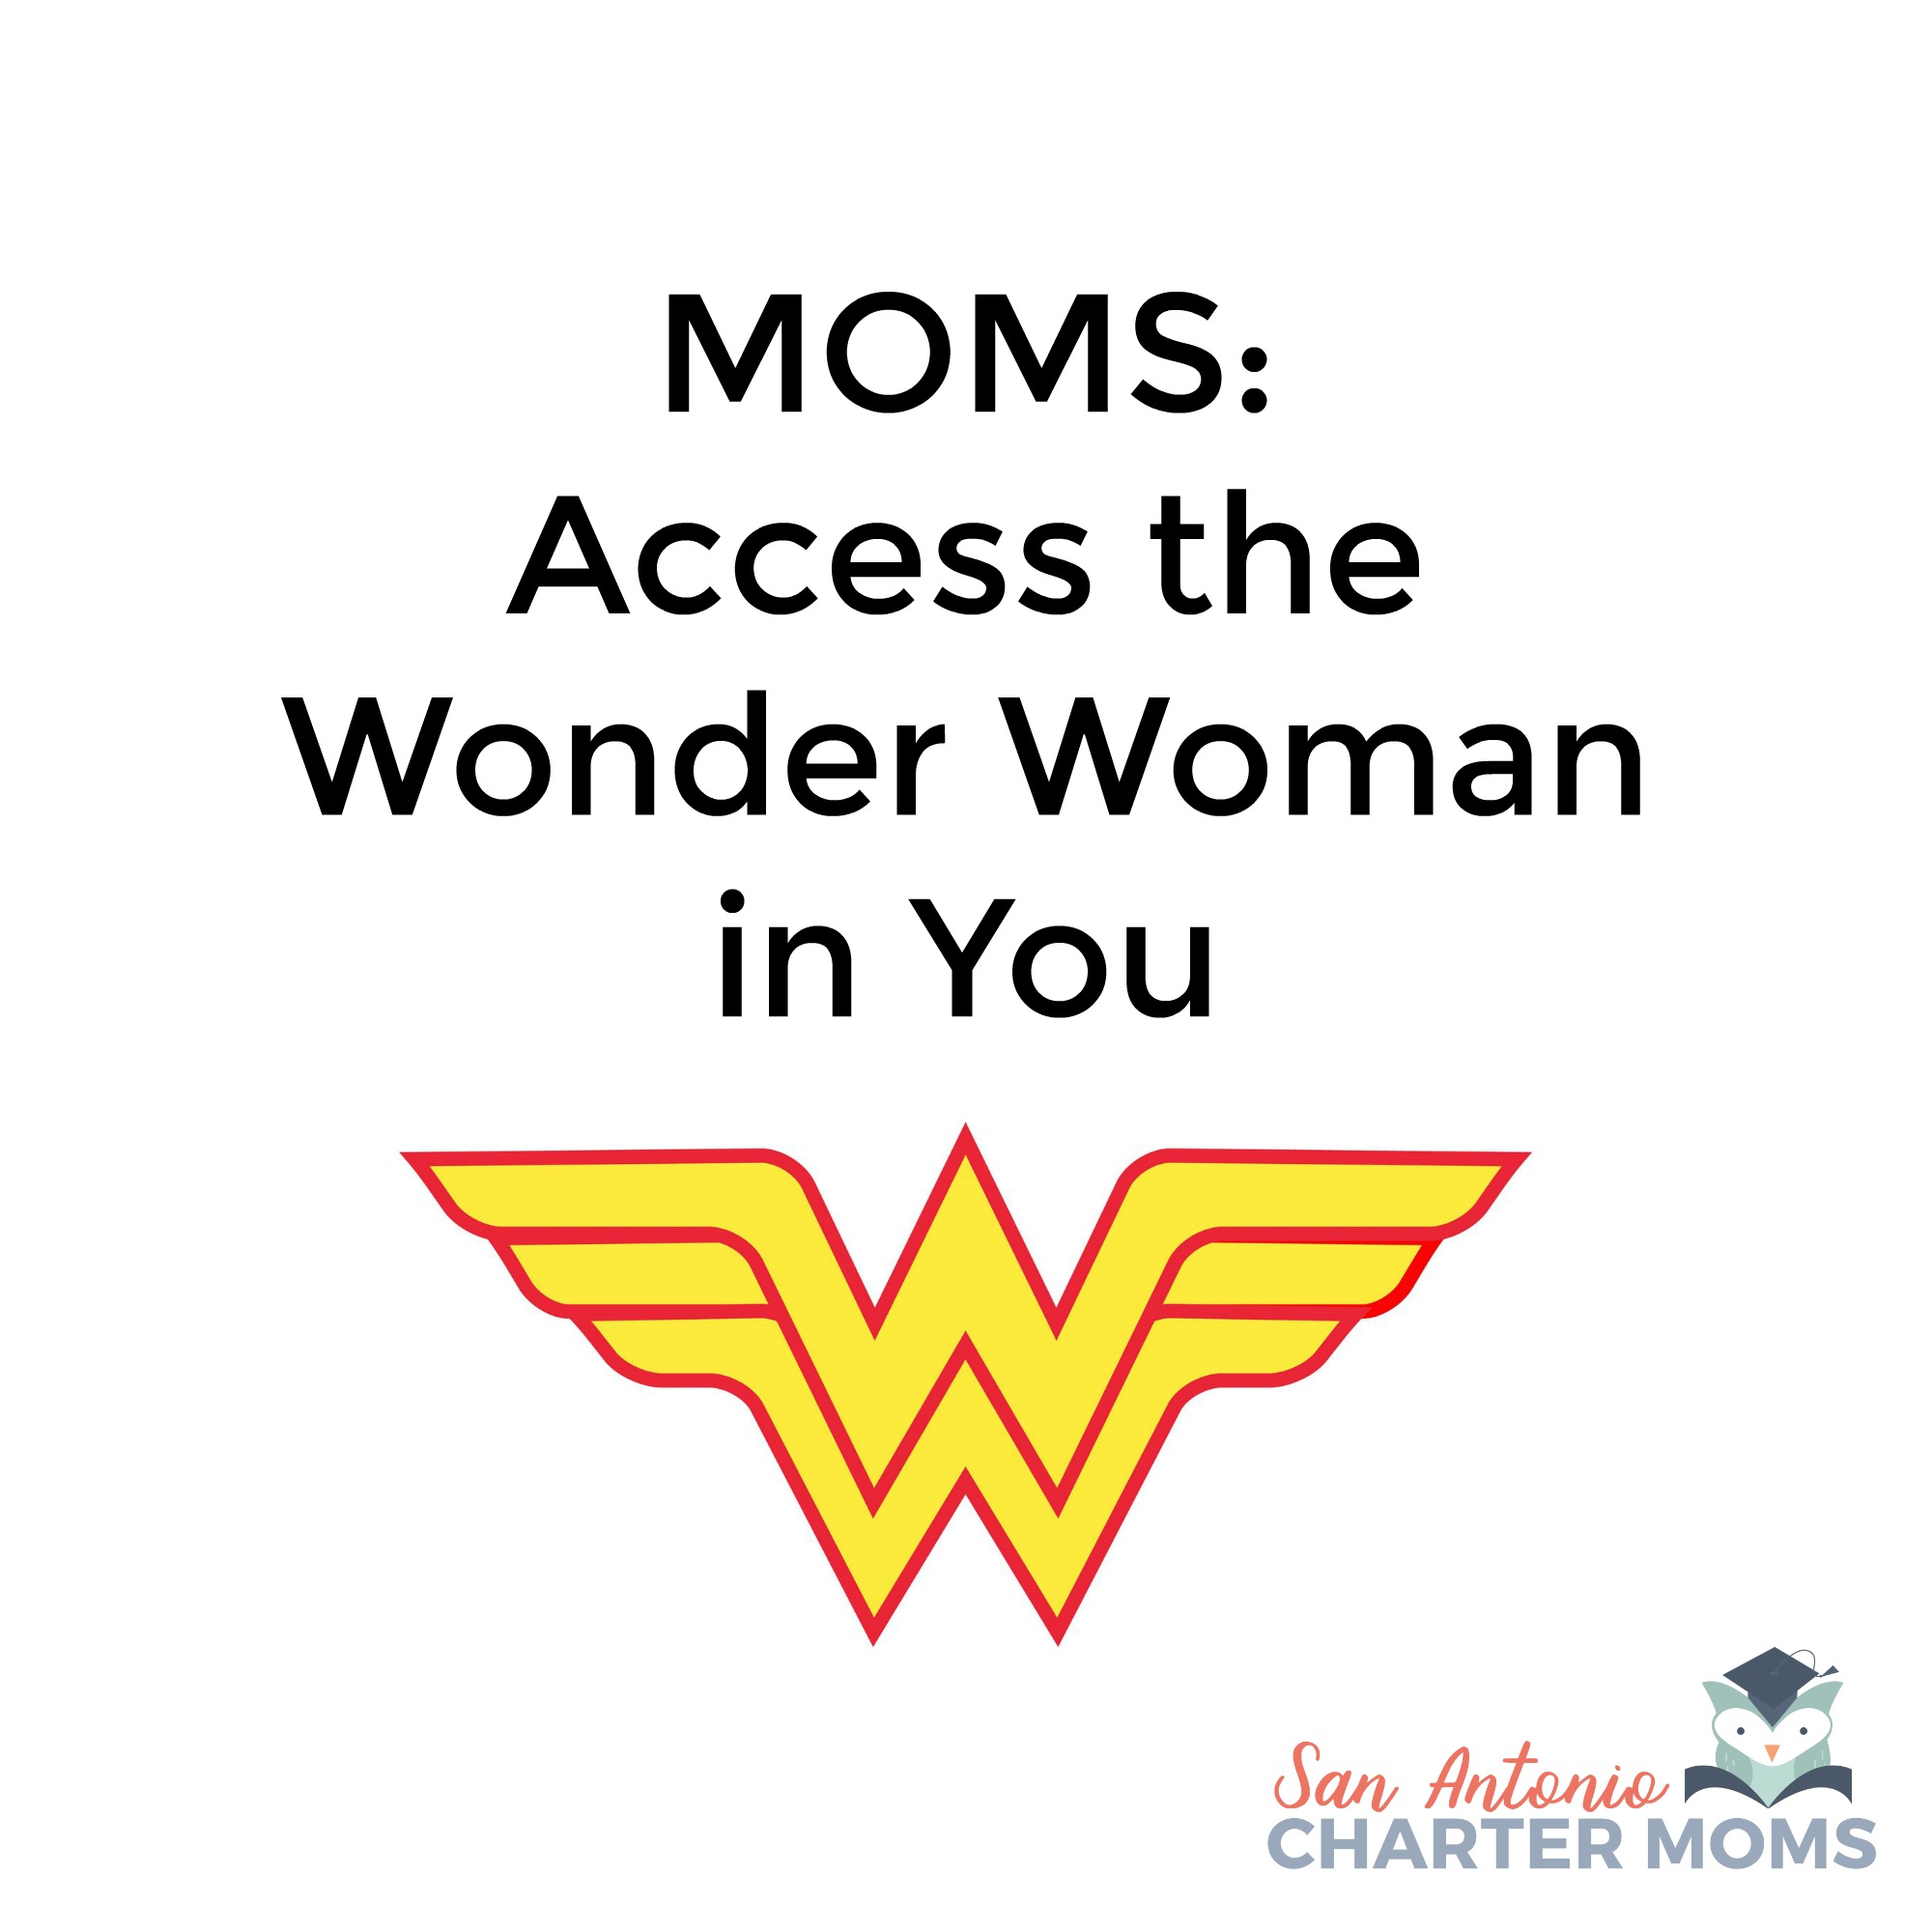 Moms: Access the Wonder Woman in You | San Antonio Charter Moms